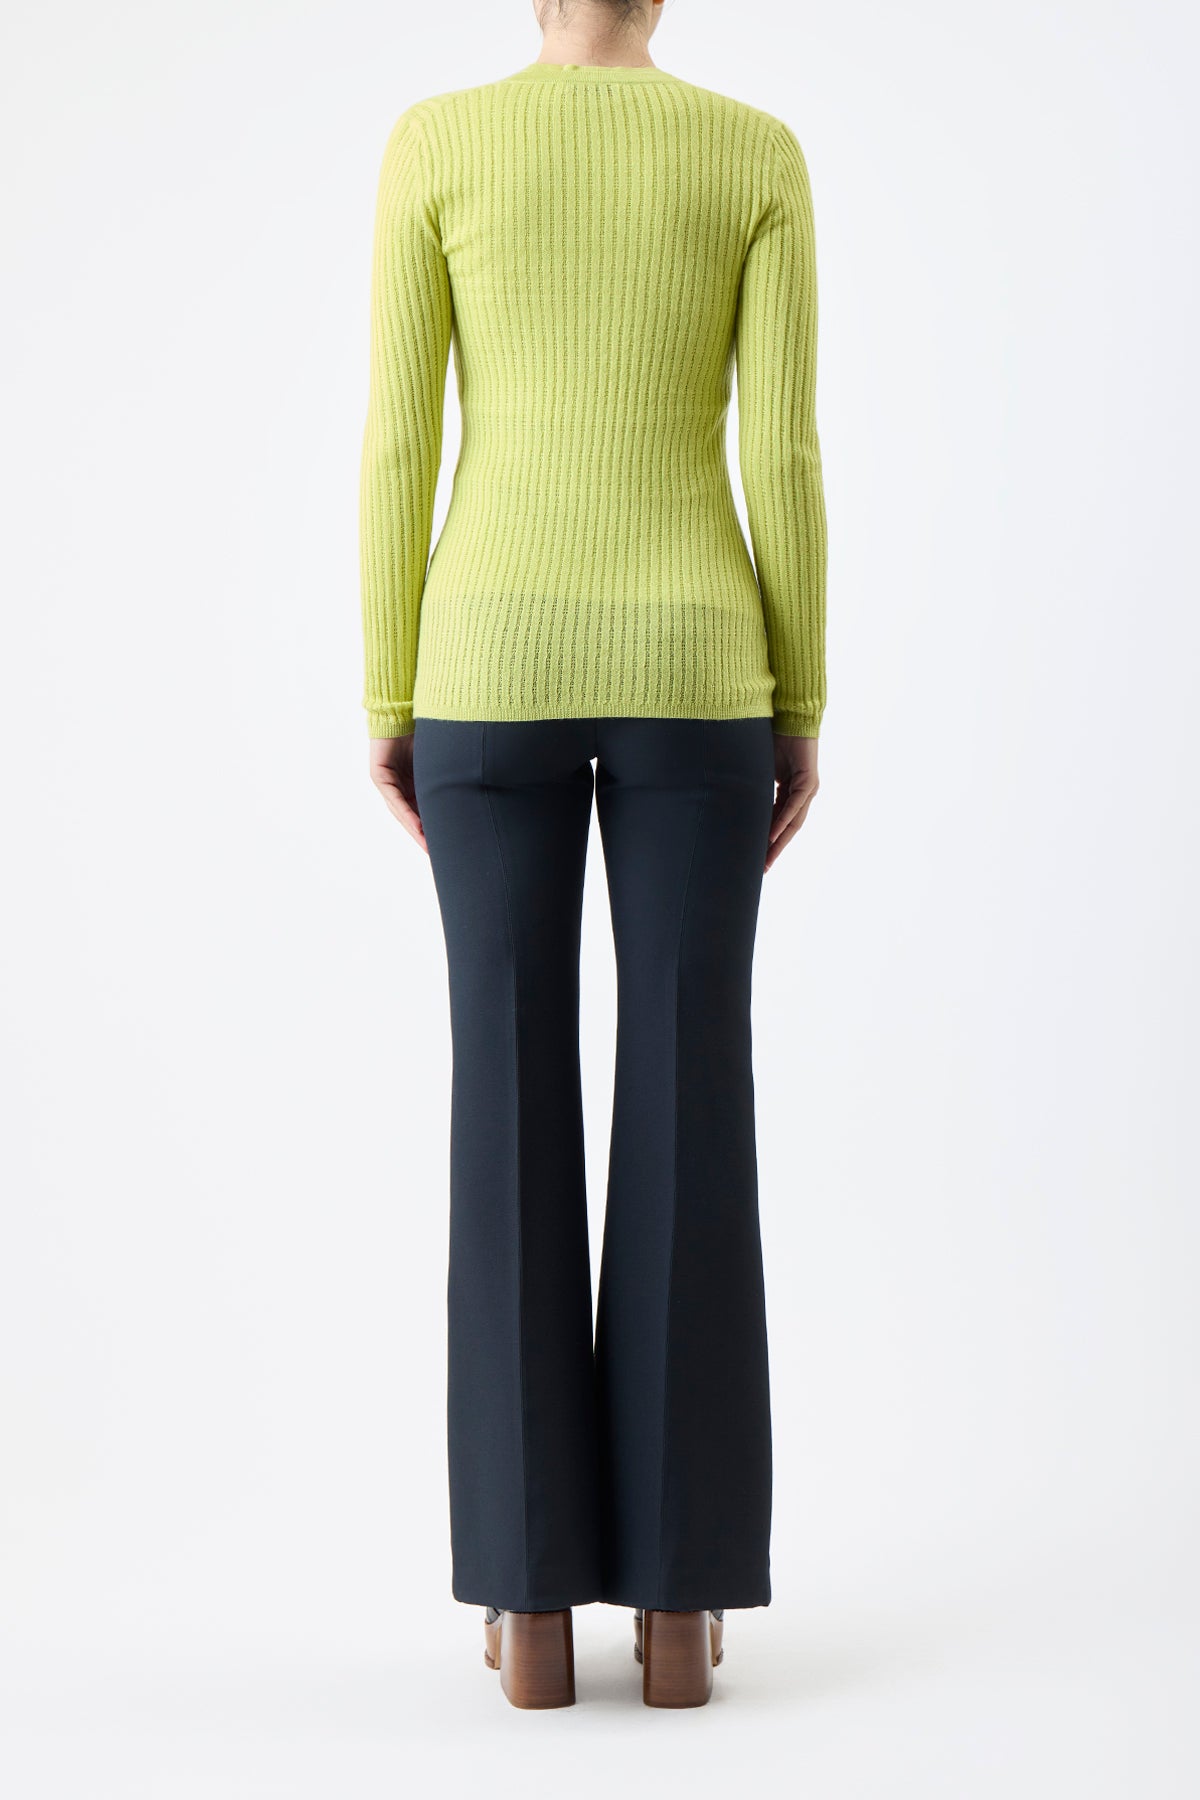 Emma Pointelle Knit Cardigan in Lime Adamite Cashmere Silk